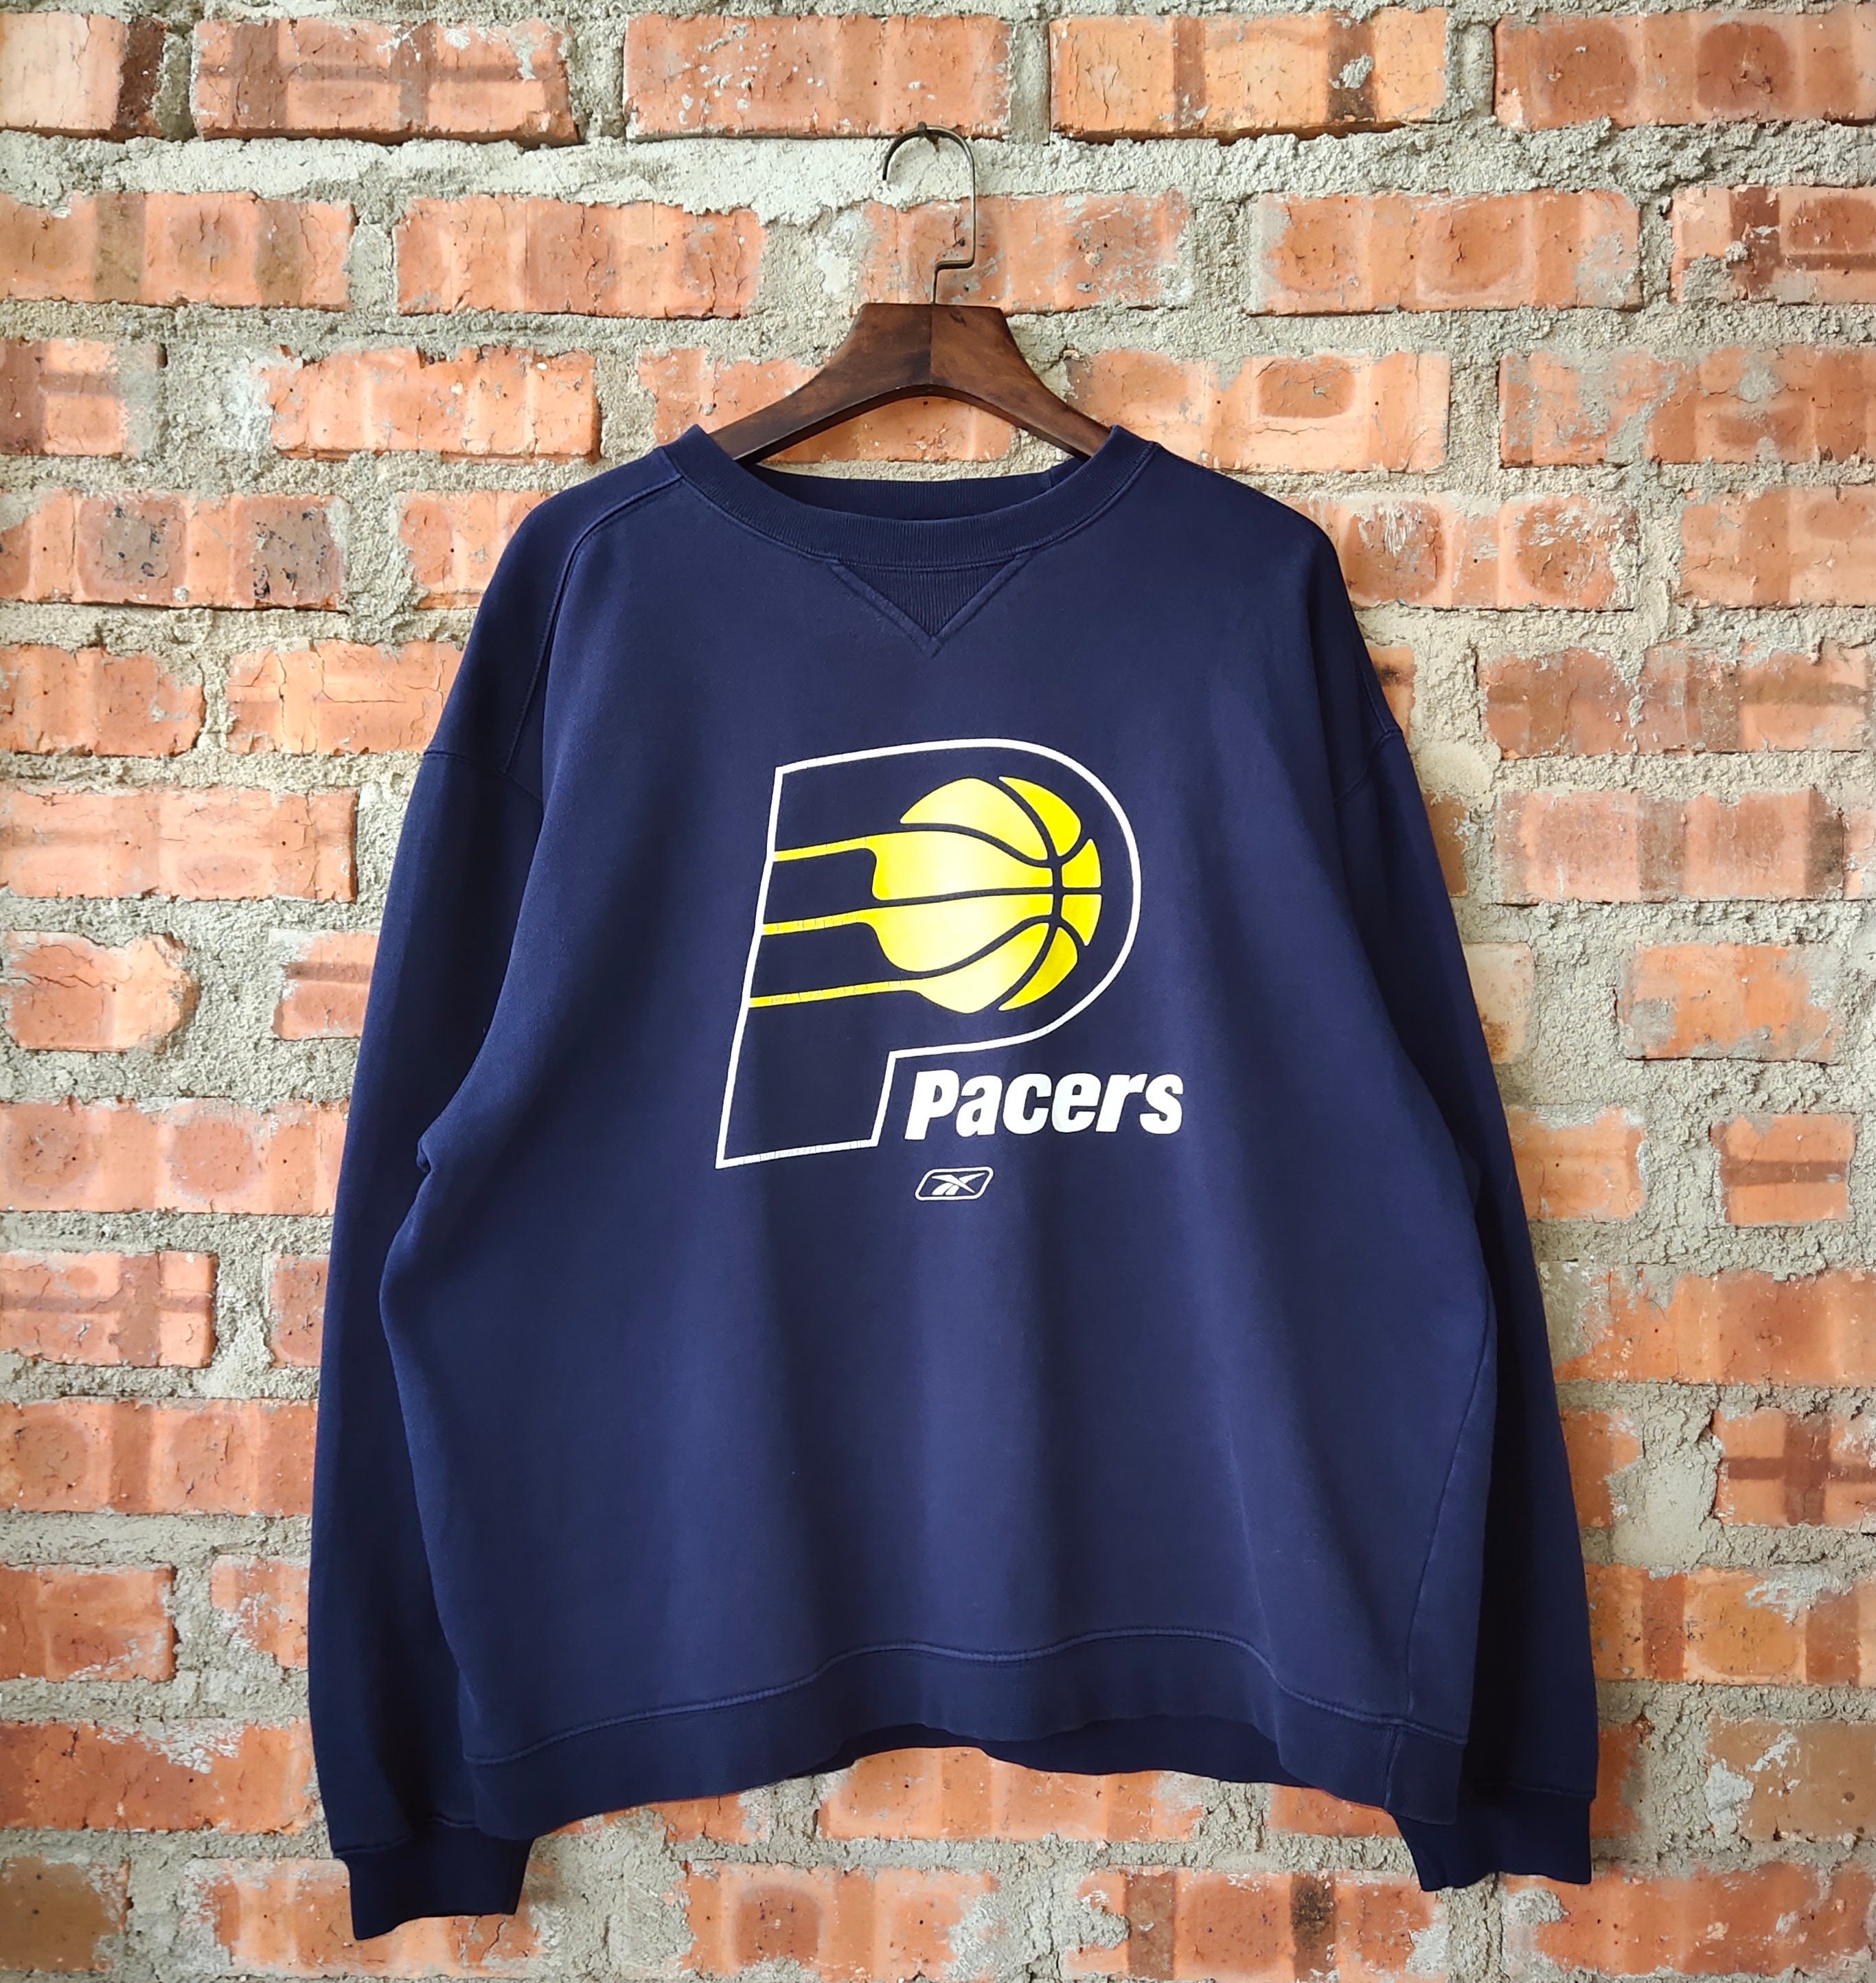 deadmansupplyco Vintage 70's-styled Basketball Decal - Indiana Pacers (Yellow) Crewneck Sweatshirt